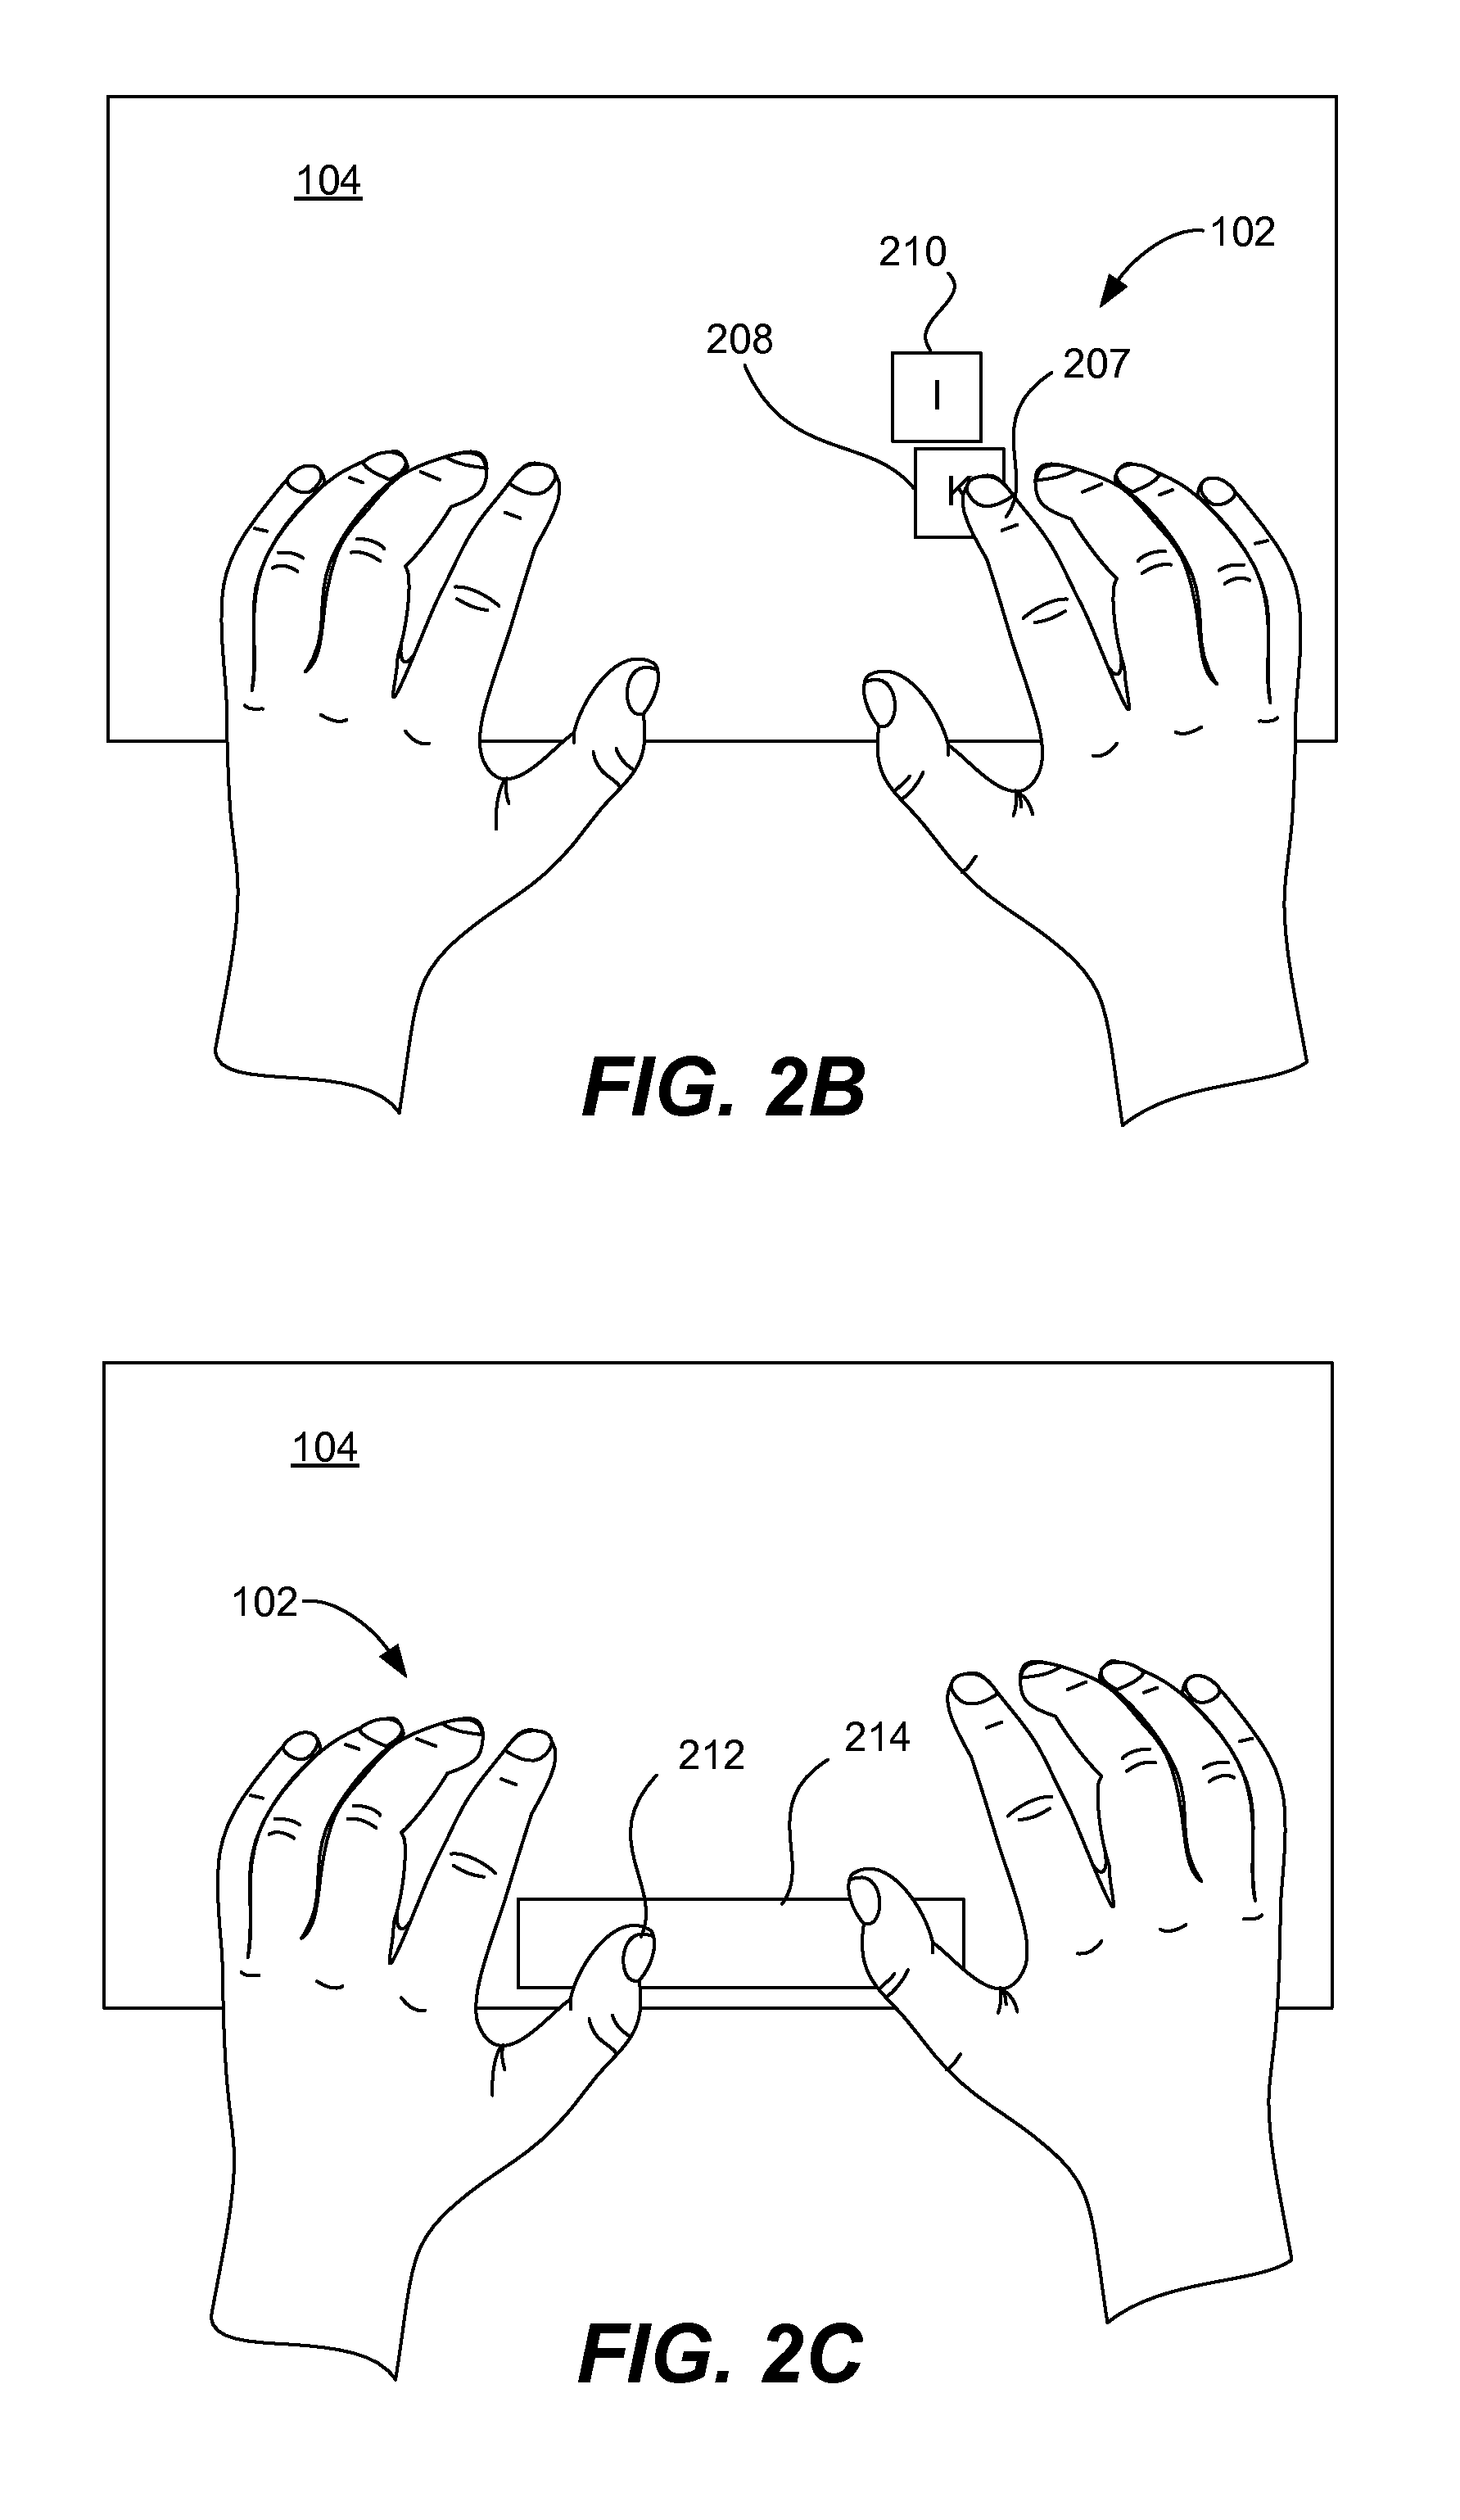 Dynamic text input using on and above surface sensing of hands and fingers